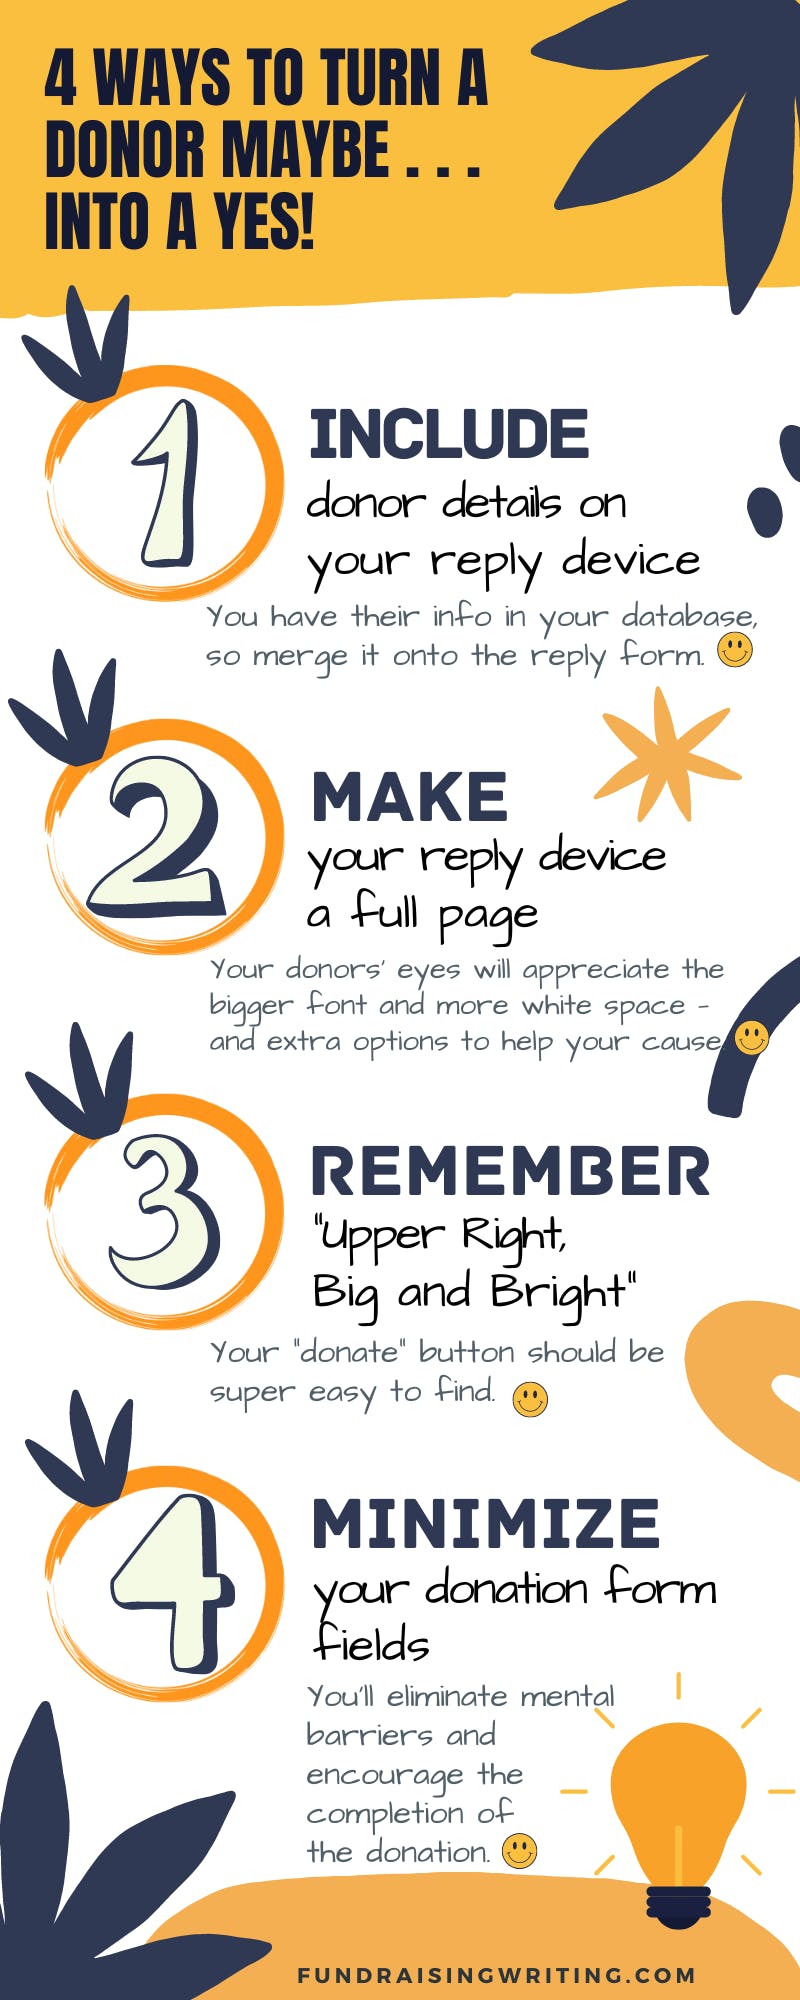 infographic showing 4 ways to turn a donor maybe into a yes